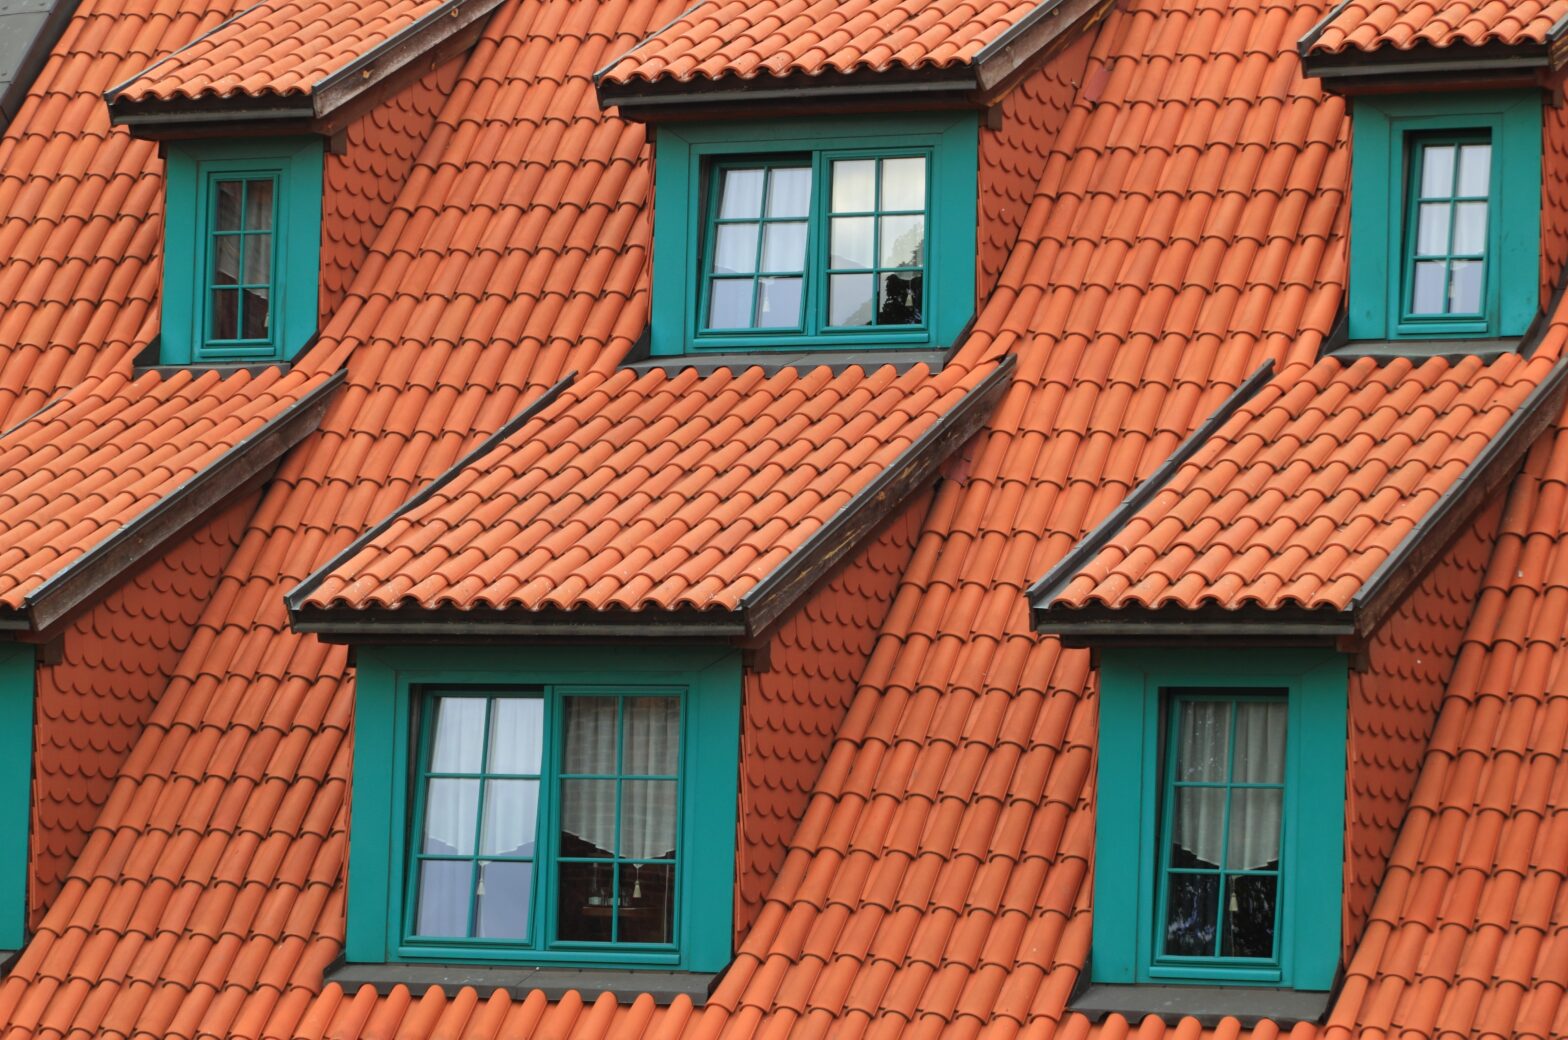 An image of an orange tiled roof and windows